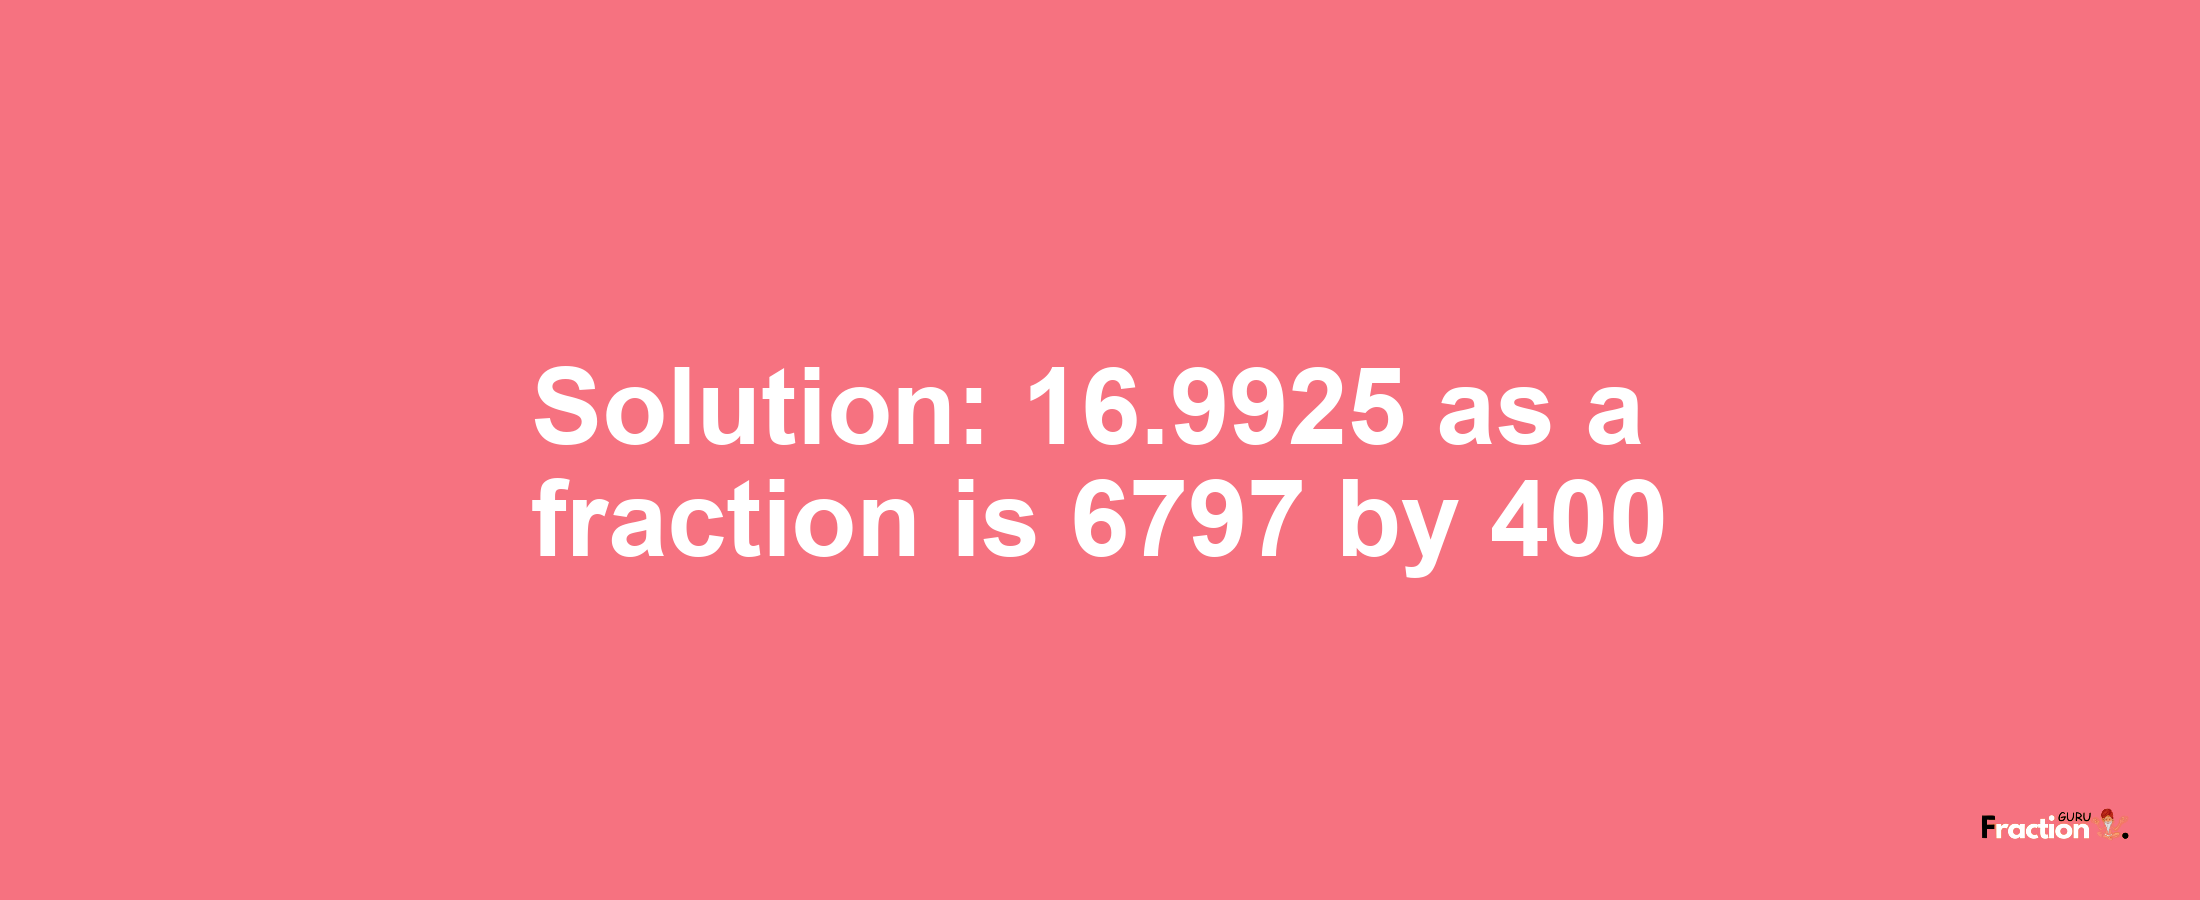 Solution:16.9925 as a fraction is 6797/400